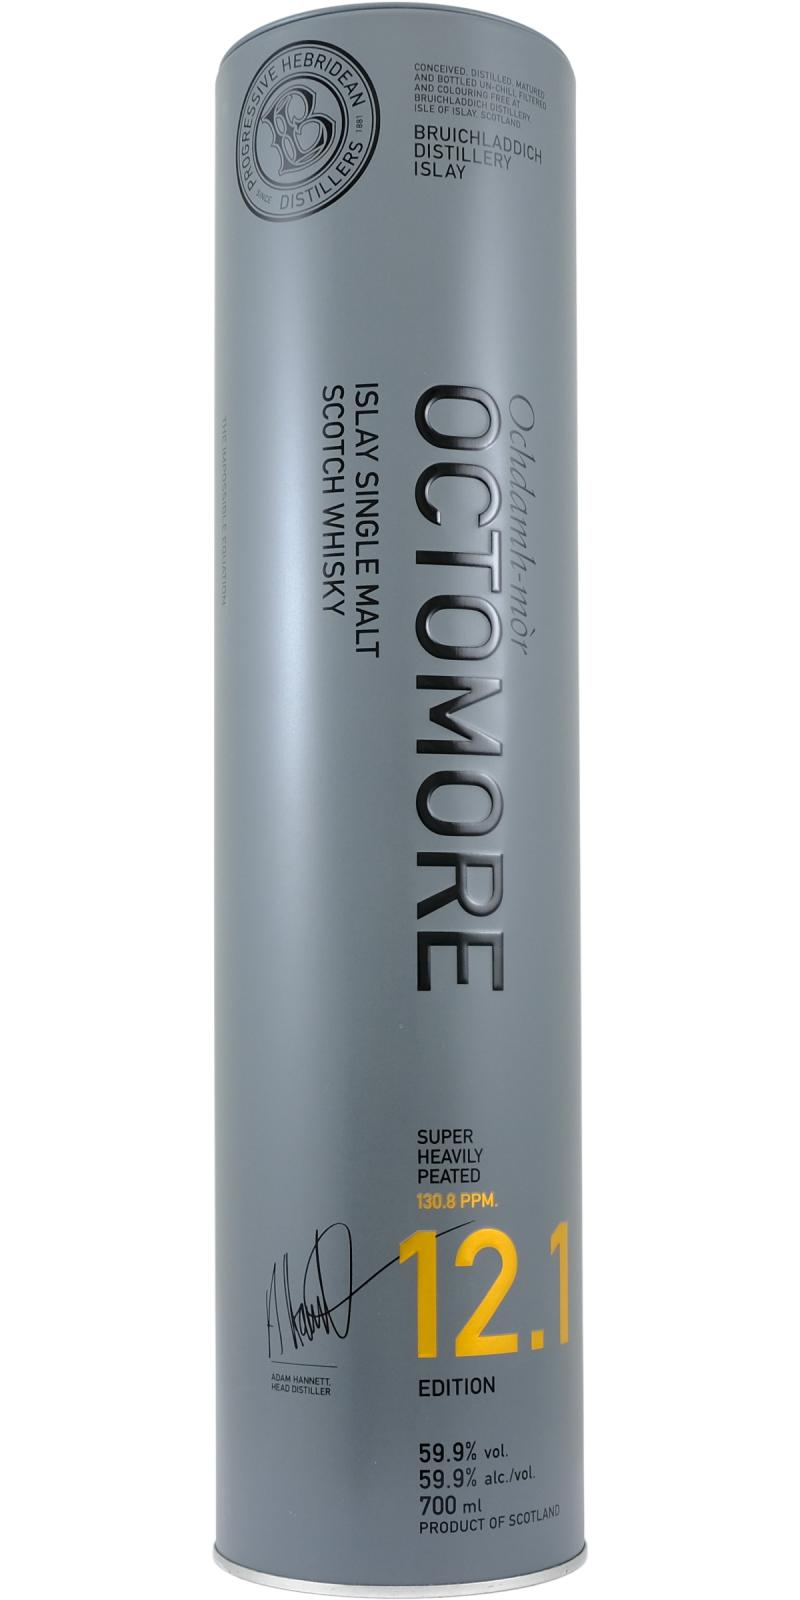 Octomore Edition 12.1 &#x2F; 130.8 PPM